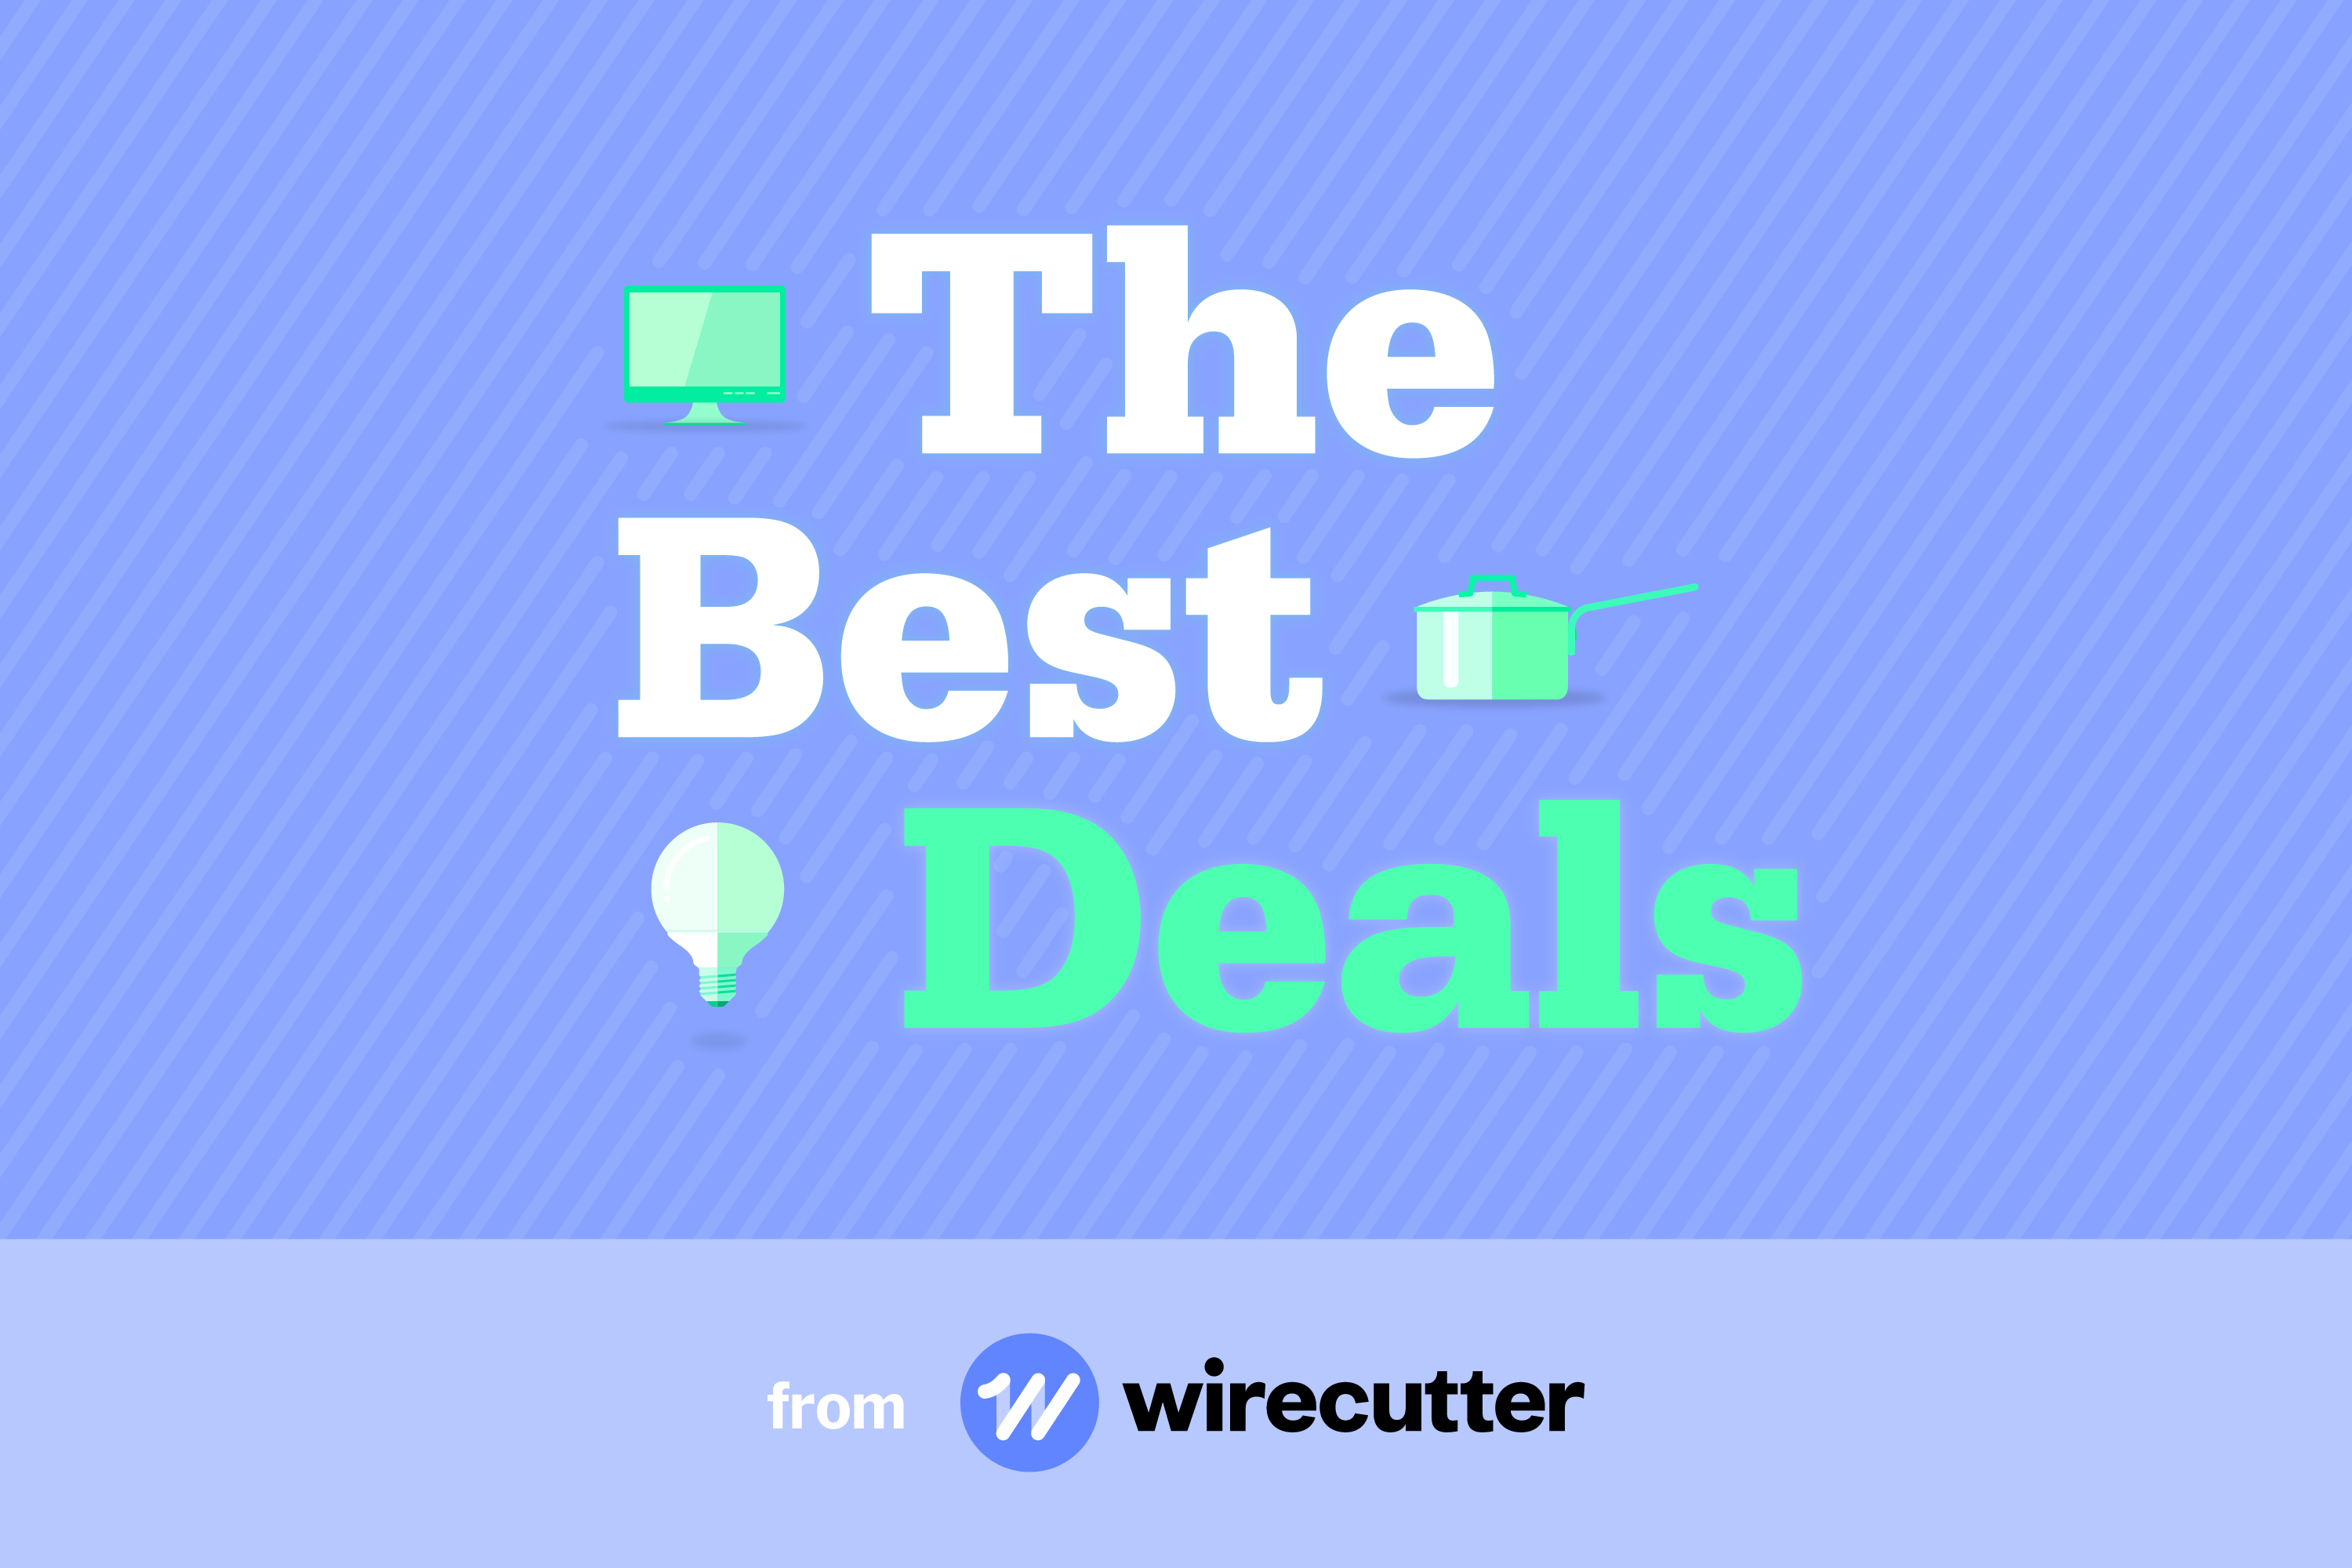 wirecutter electric kettle